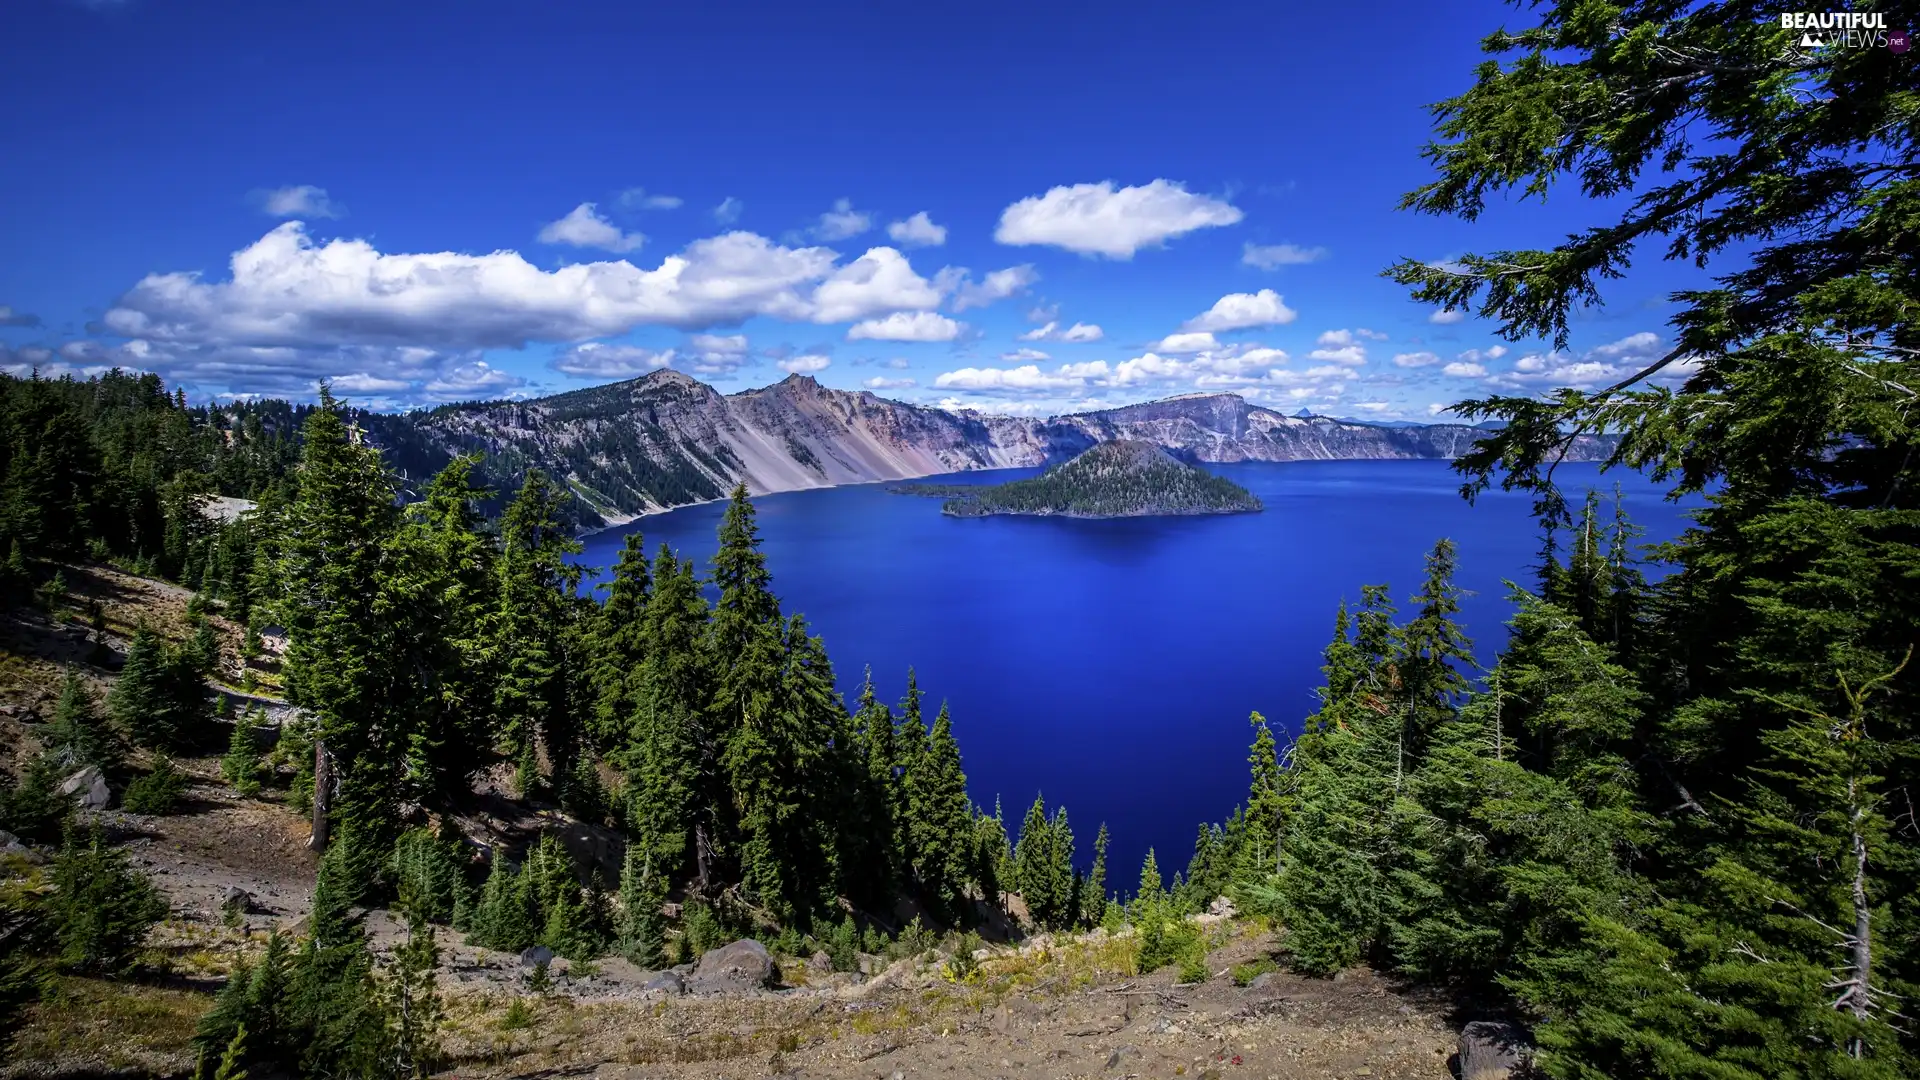 Crater Lake National Park, Crater Lake, viewes, Island of Wizard, trees, Oregon, The United States, Mountains